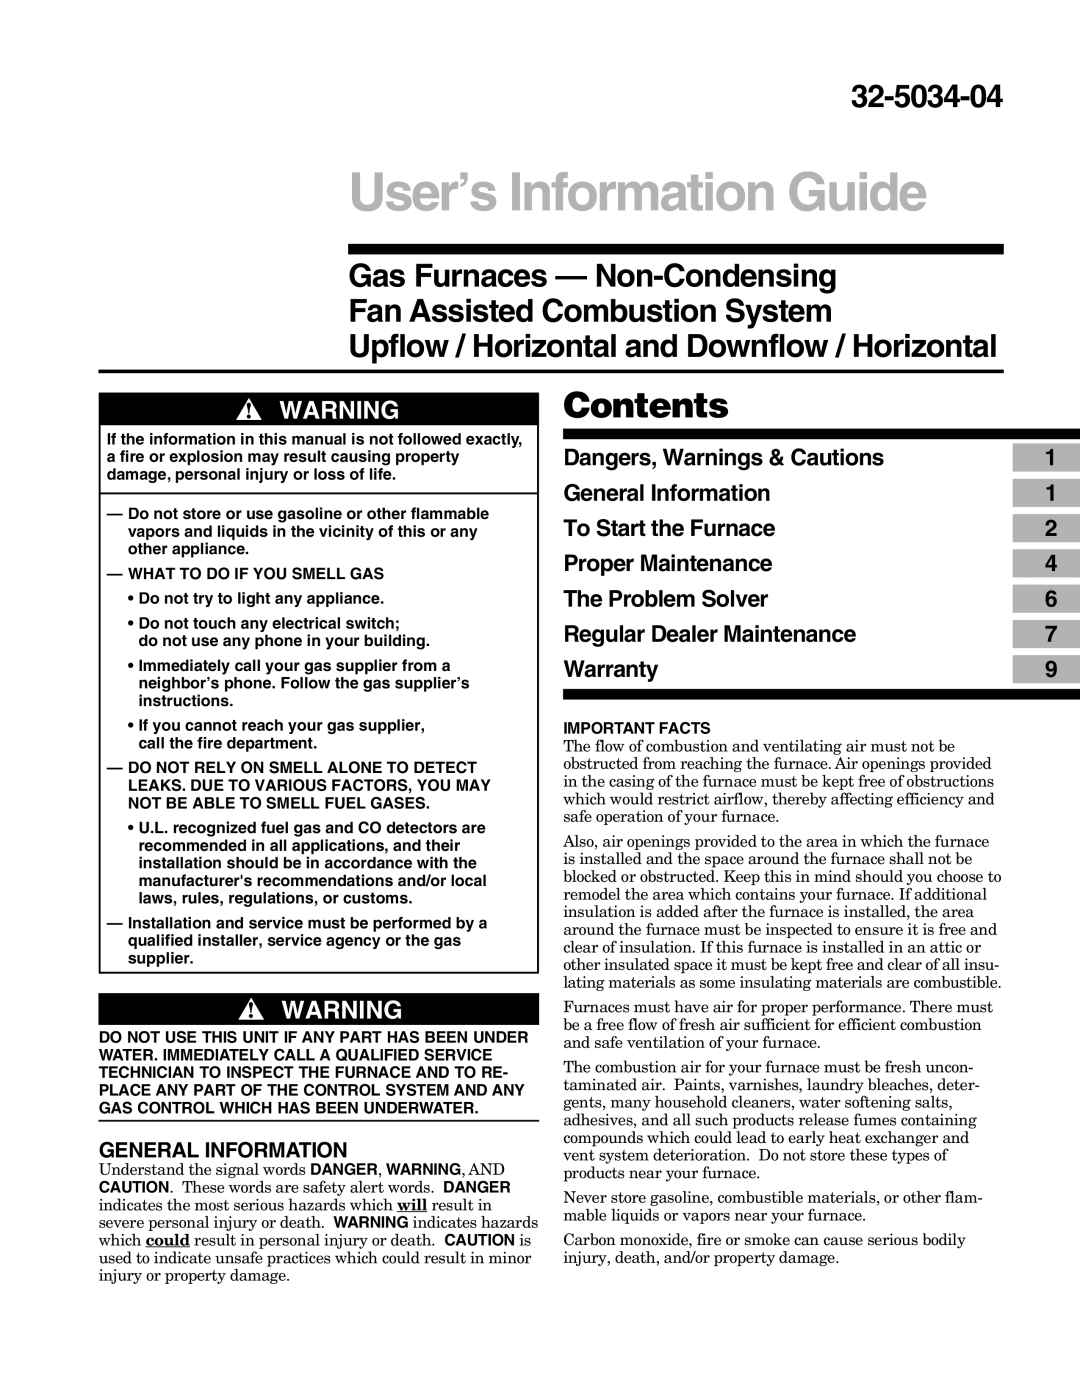 American Standard warranty Contents, User’s Information Guide, 32-5034-04, Gas Furnaces — Non-Condensing 